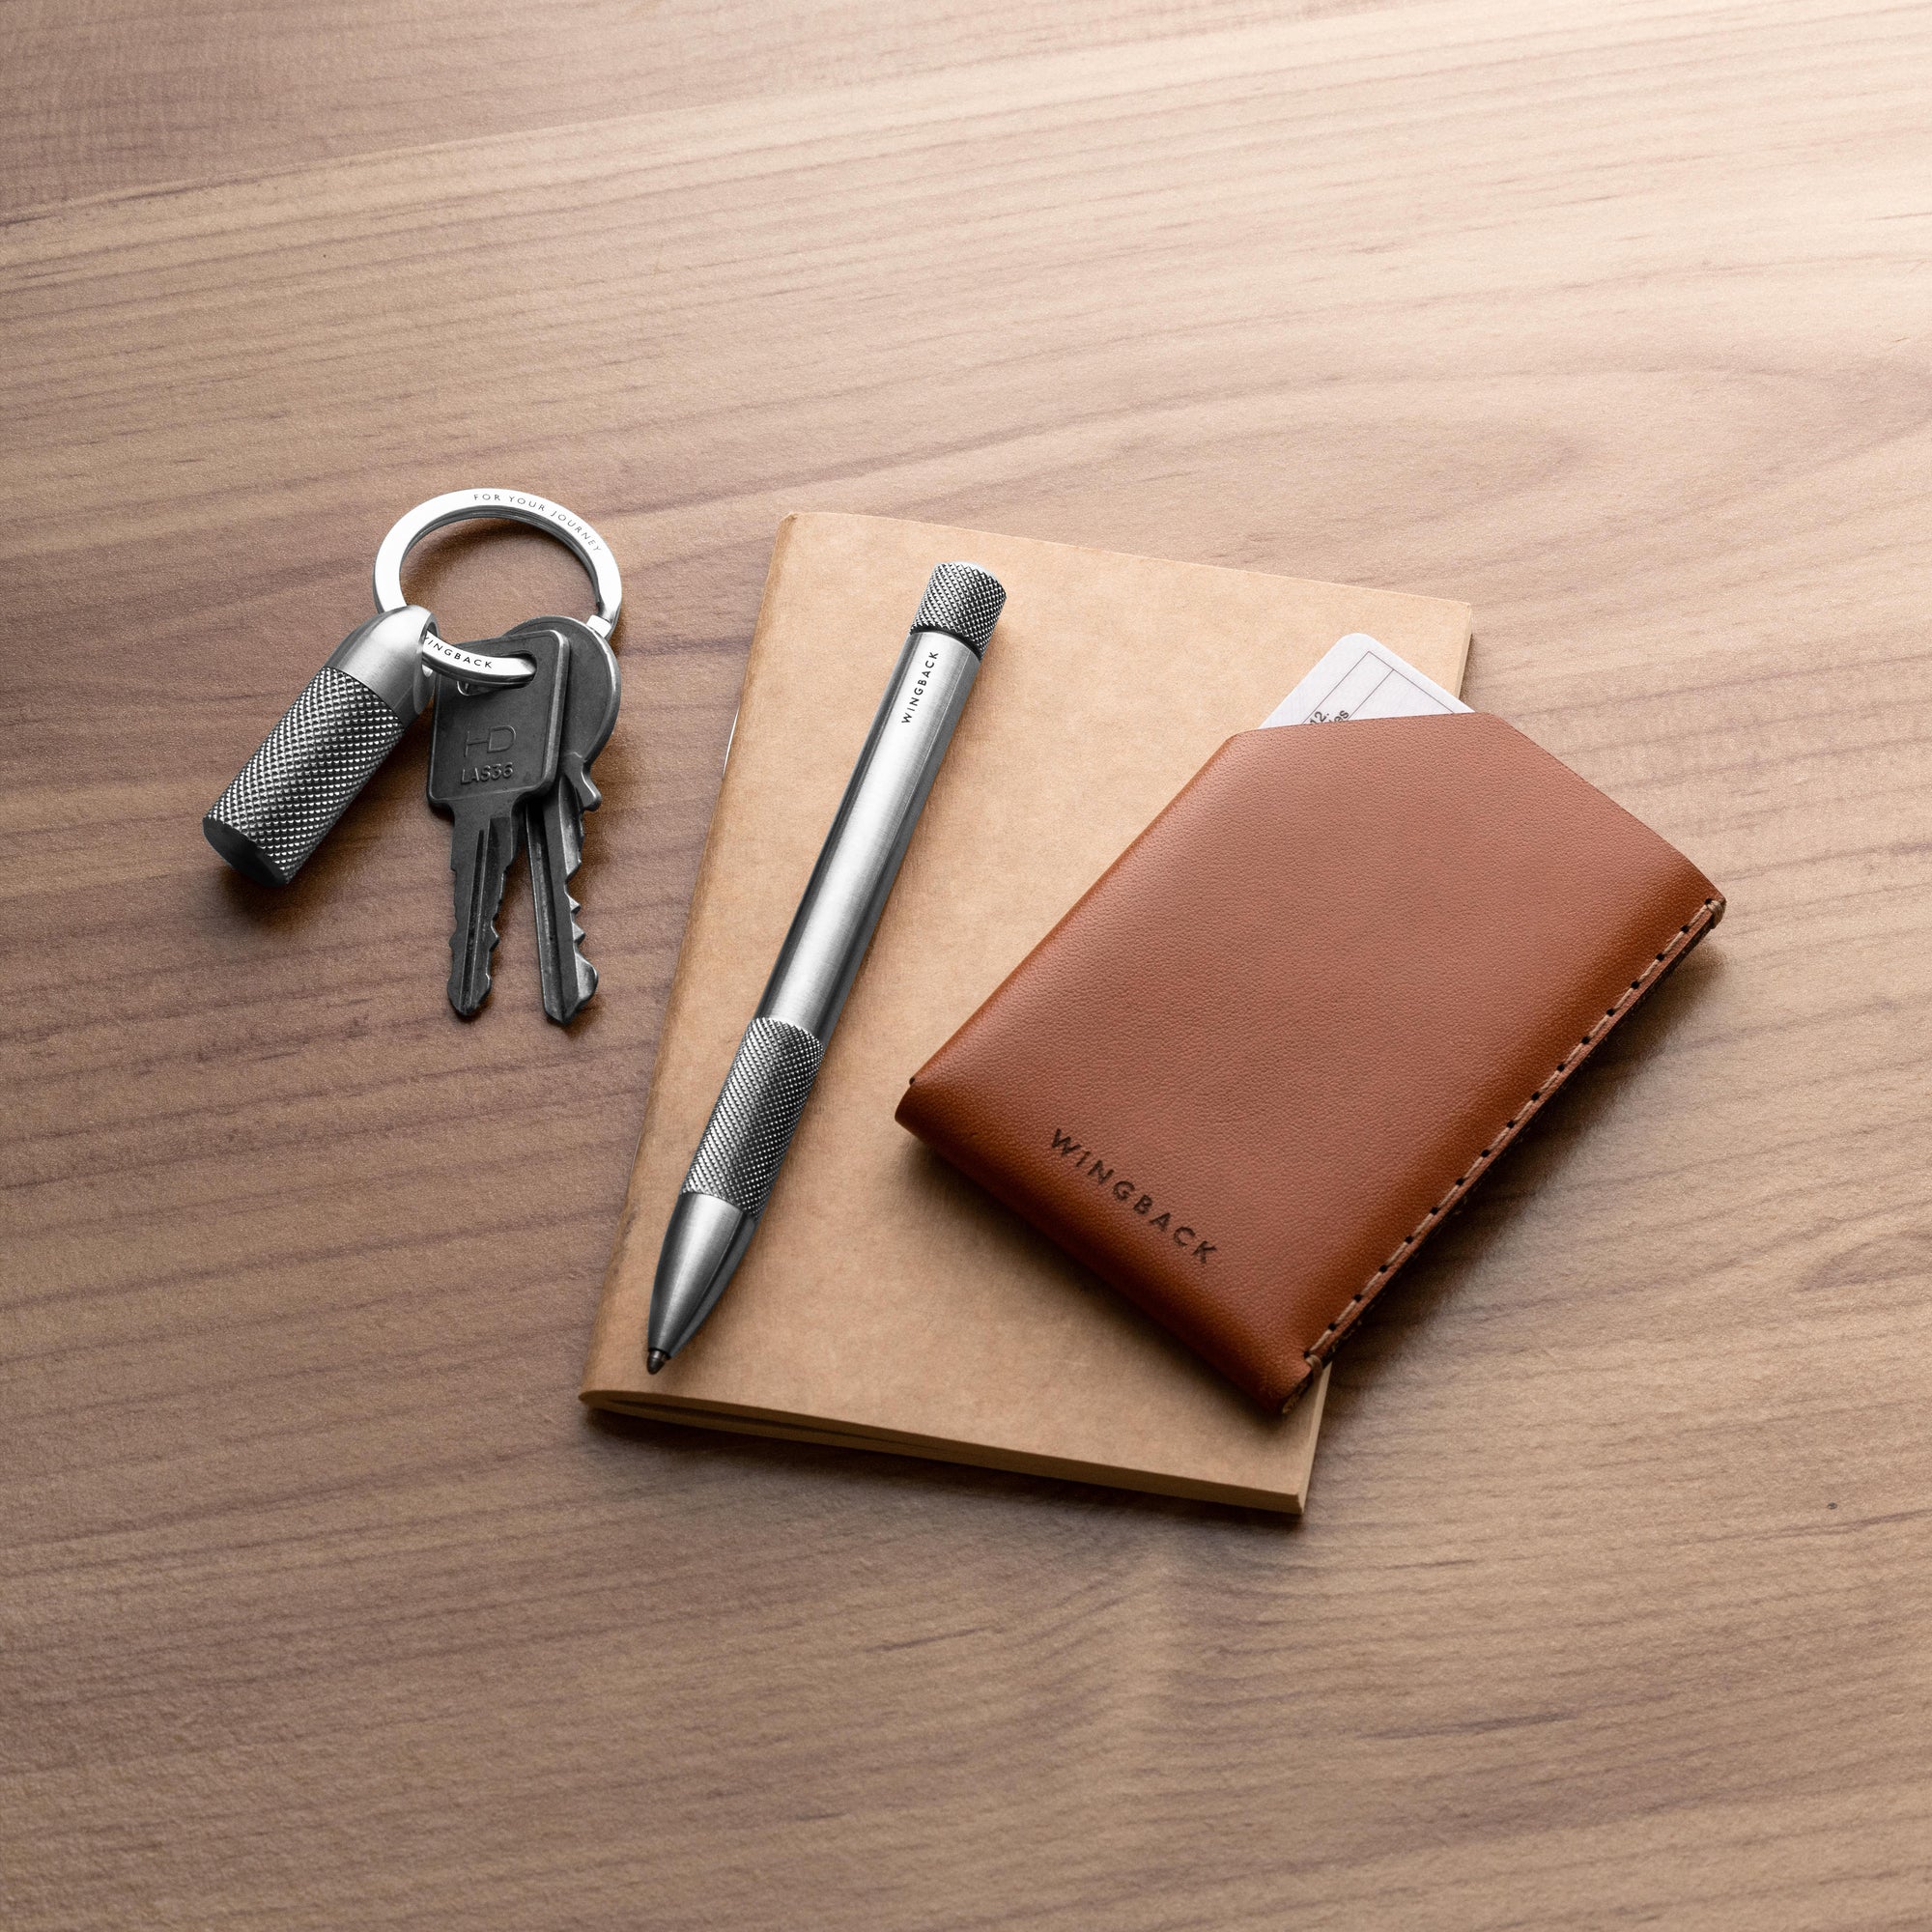 Flat lay of key carry, stationery and leather wallets made by Wingback